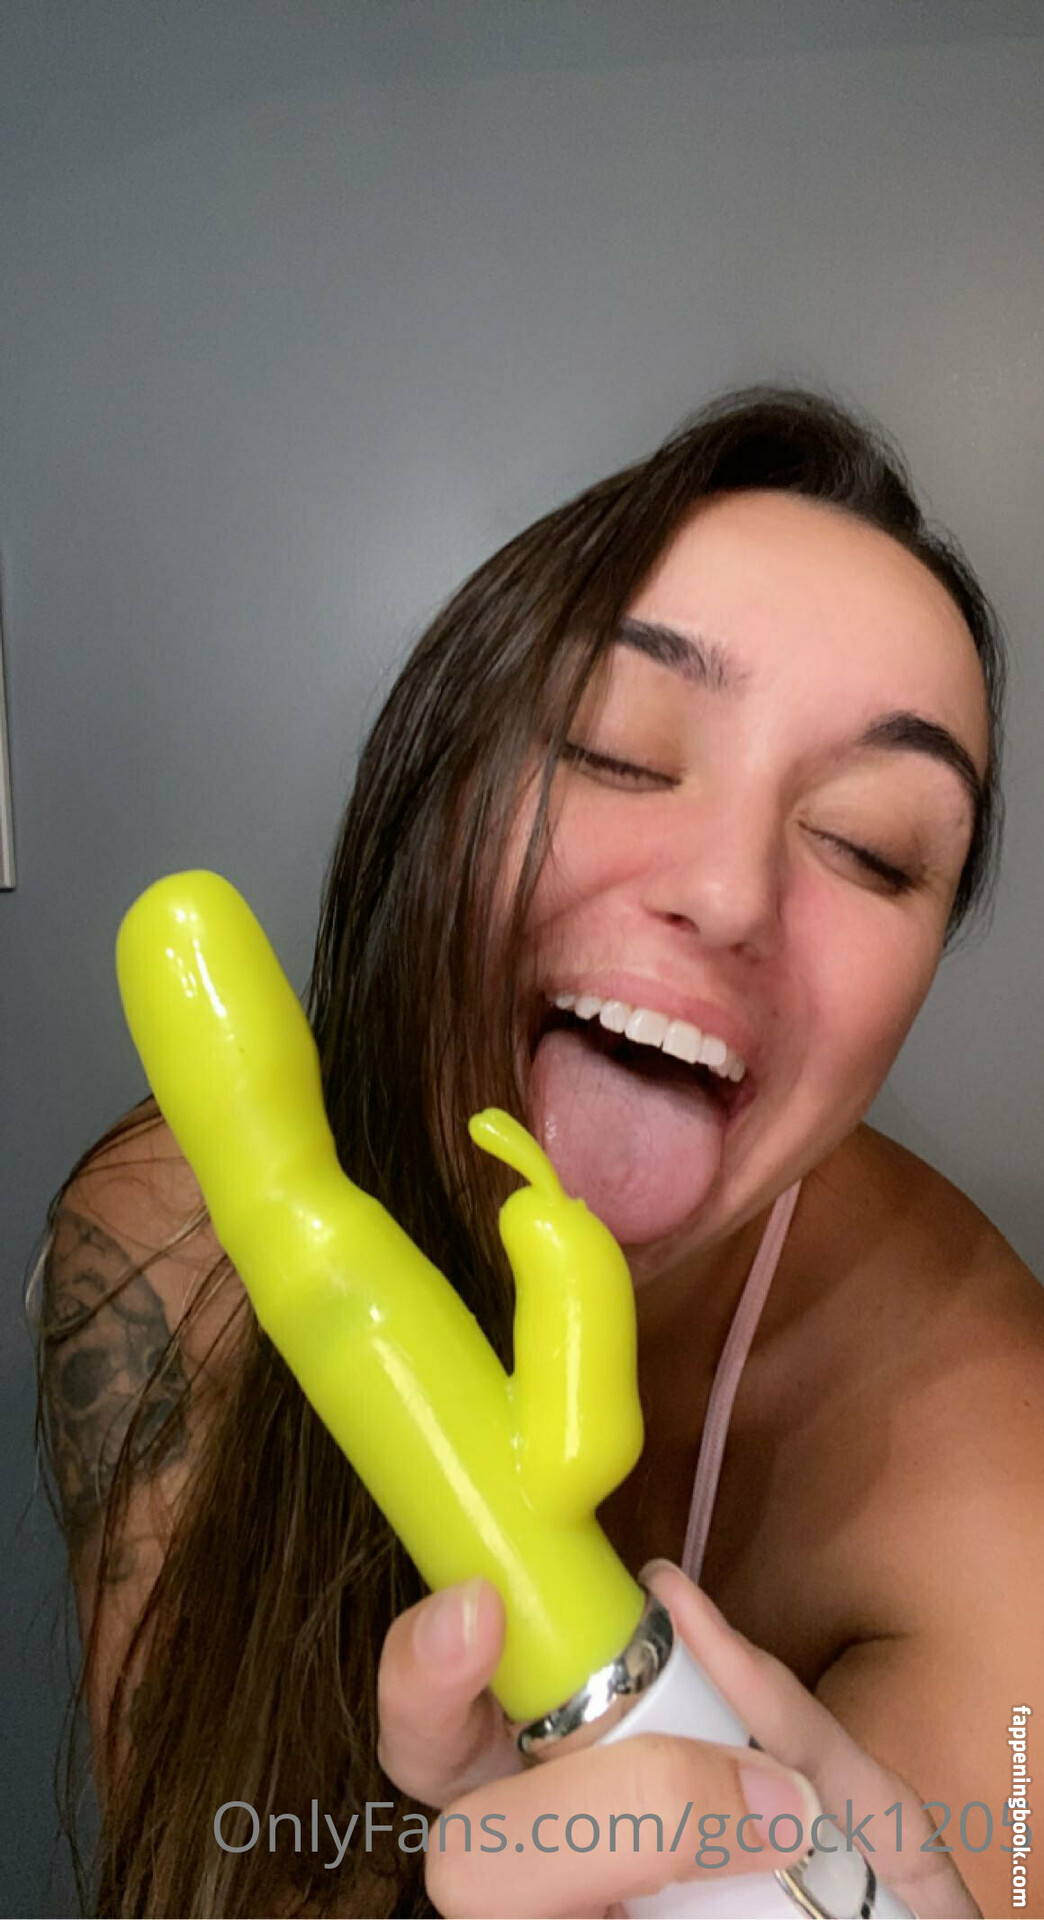 gcock1205 Nude OnlyFans Leaks